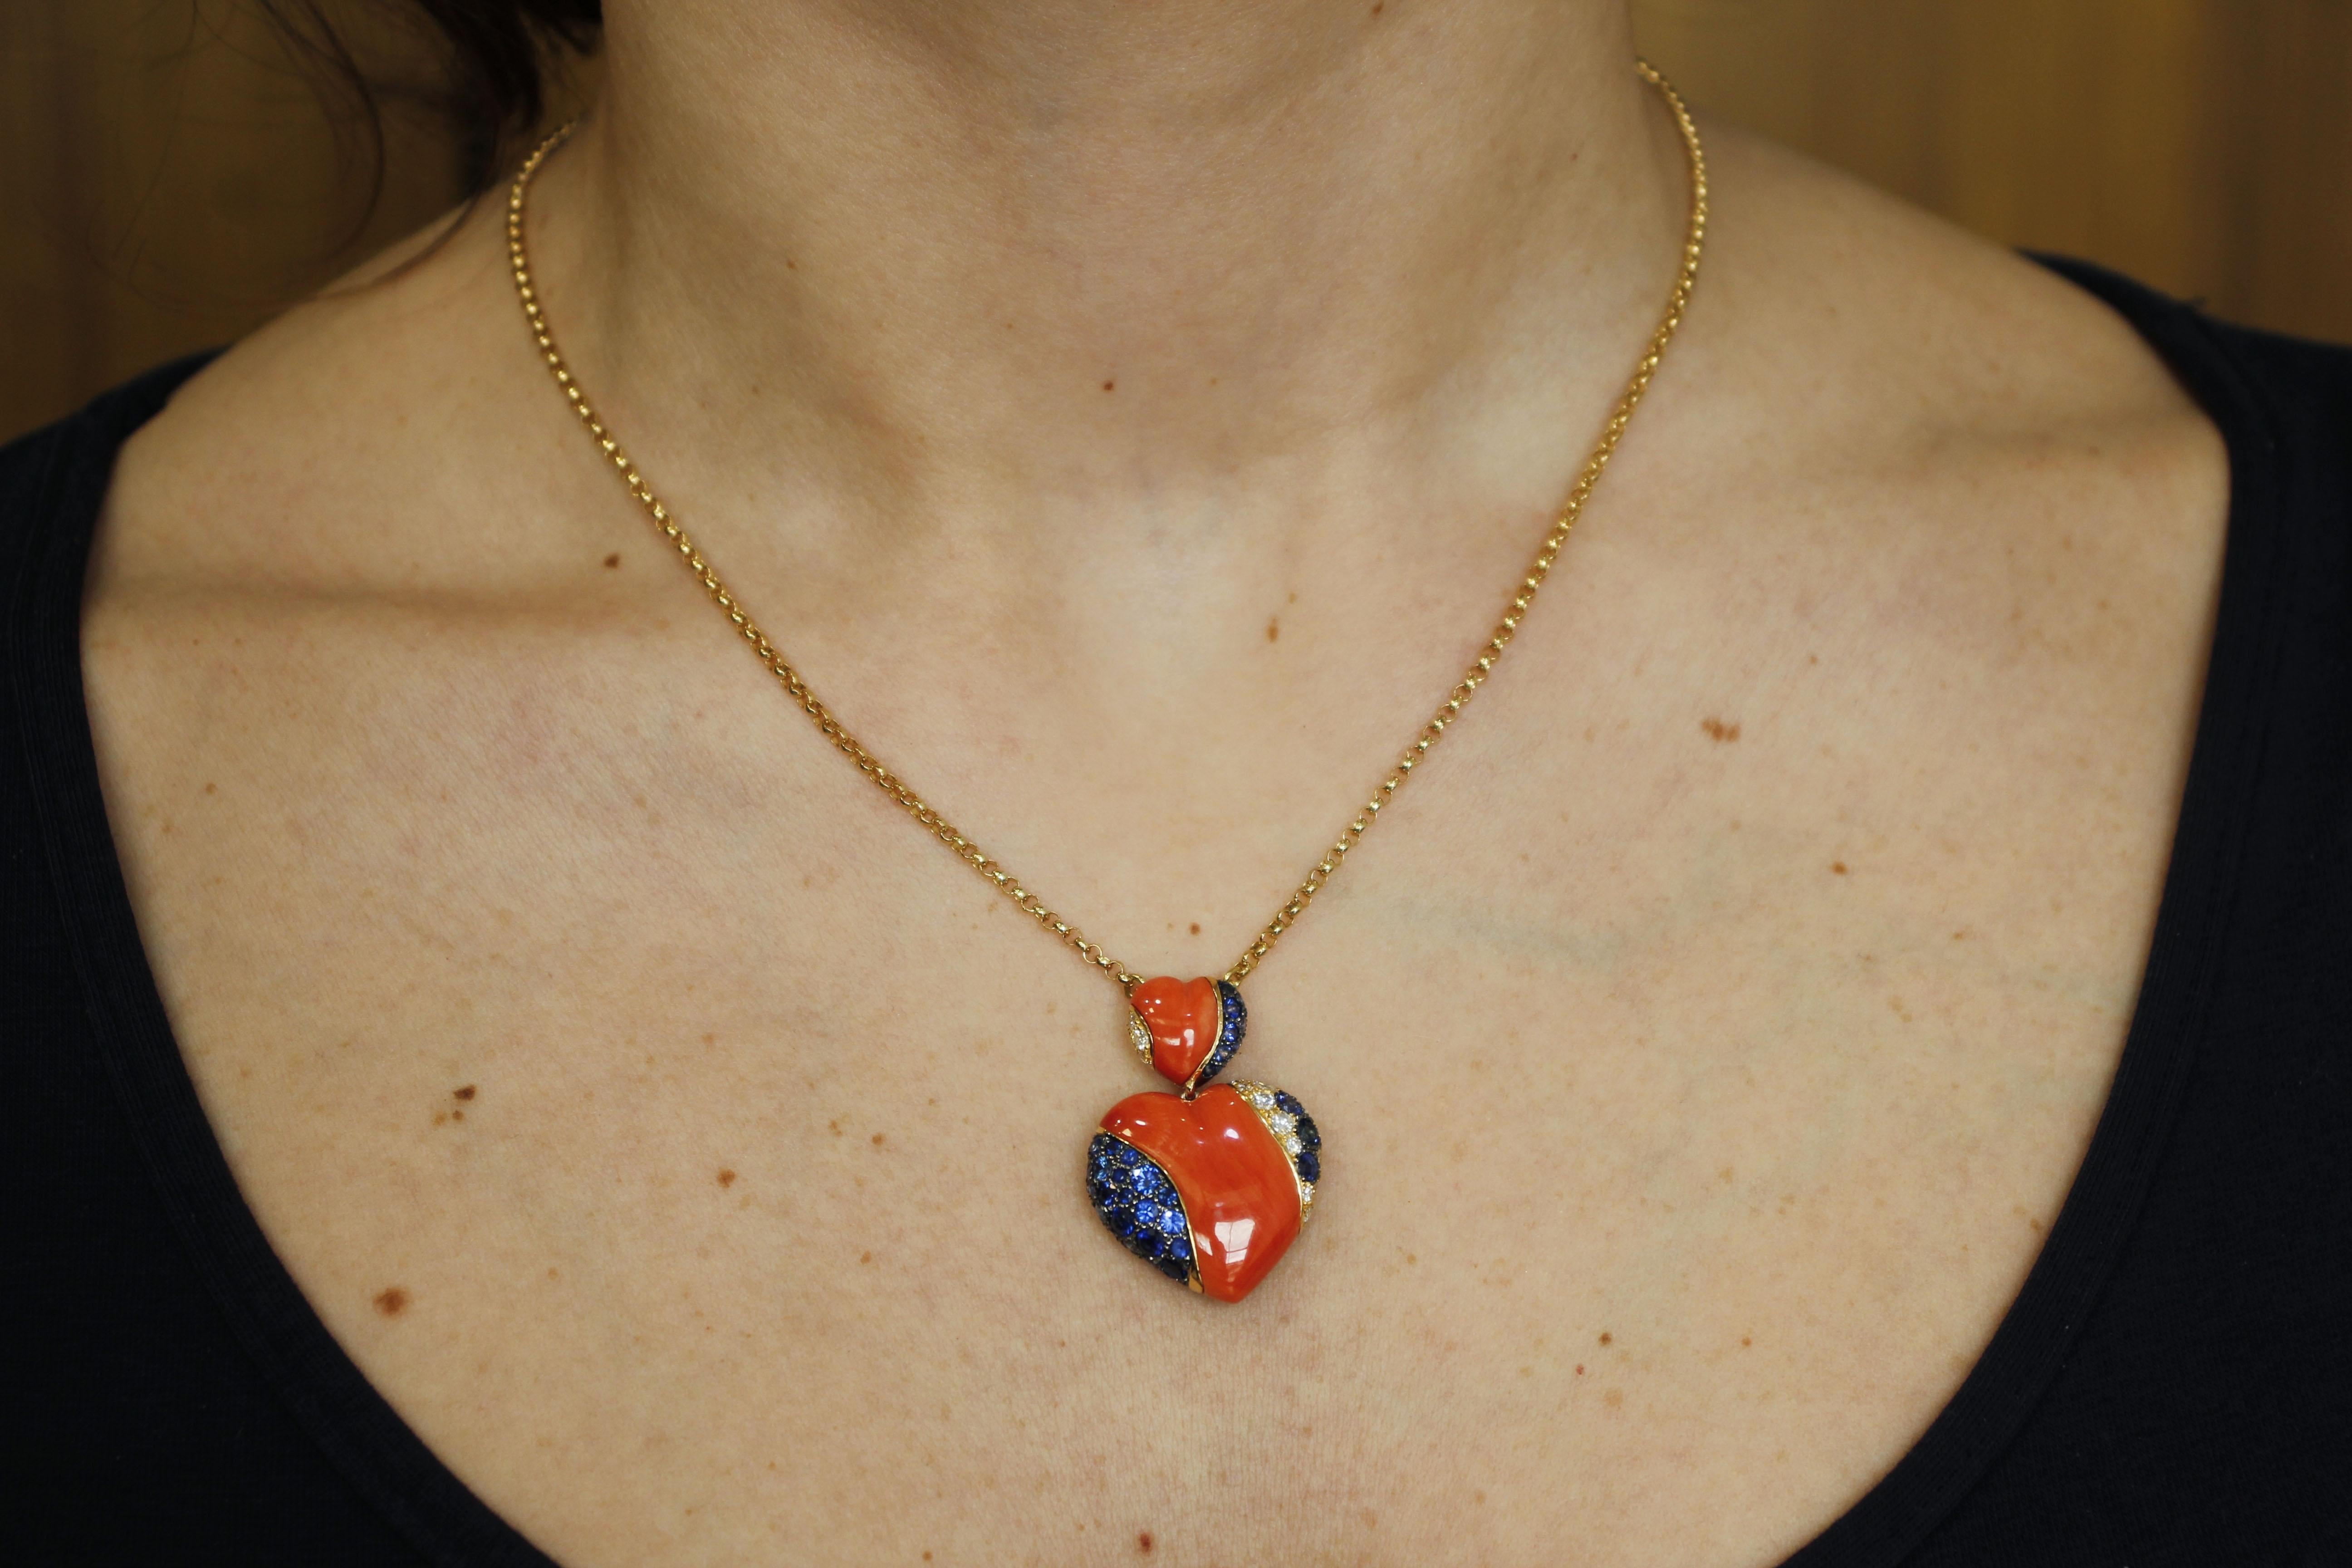 18K Gold Chain Necklace with Red Coral, Diamonds & Sapphire Heart Pendant 2